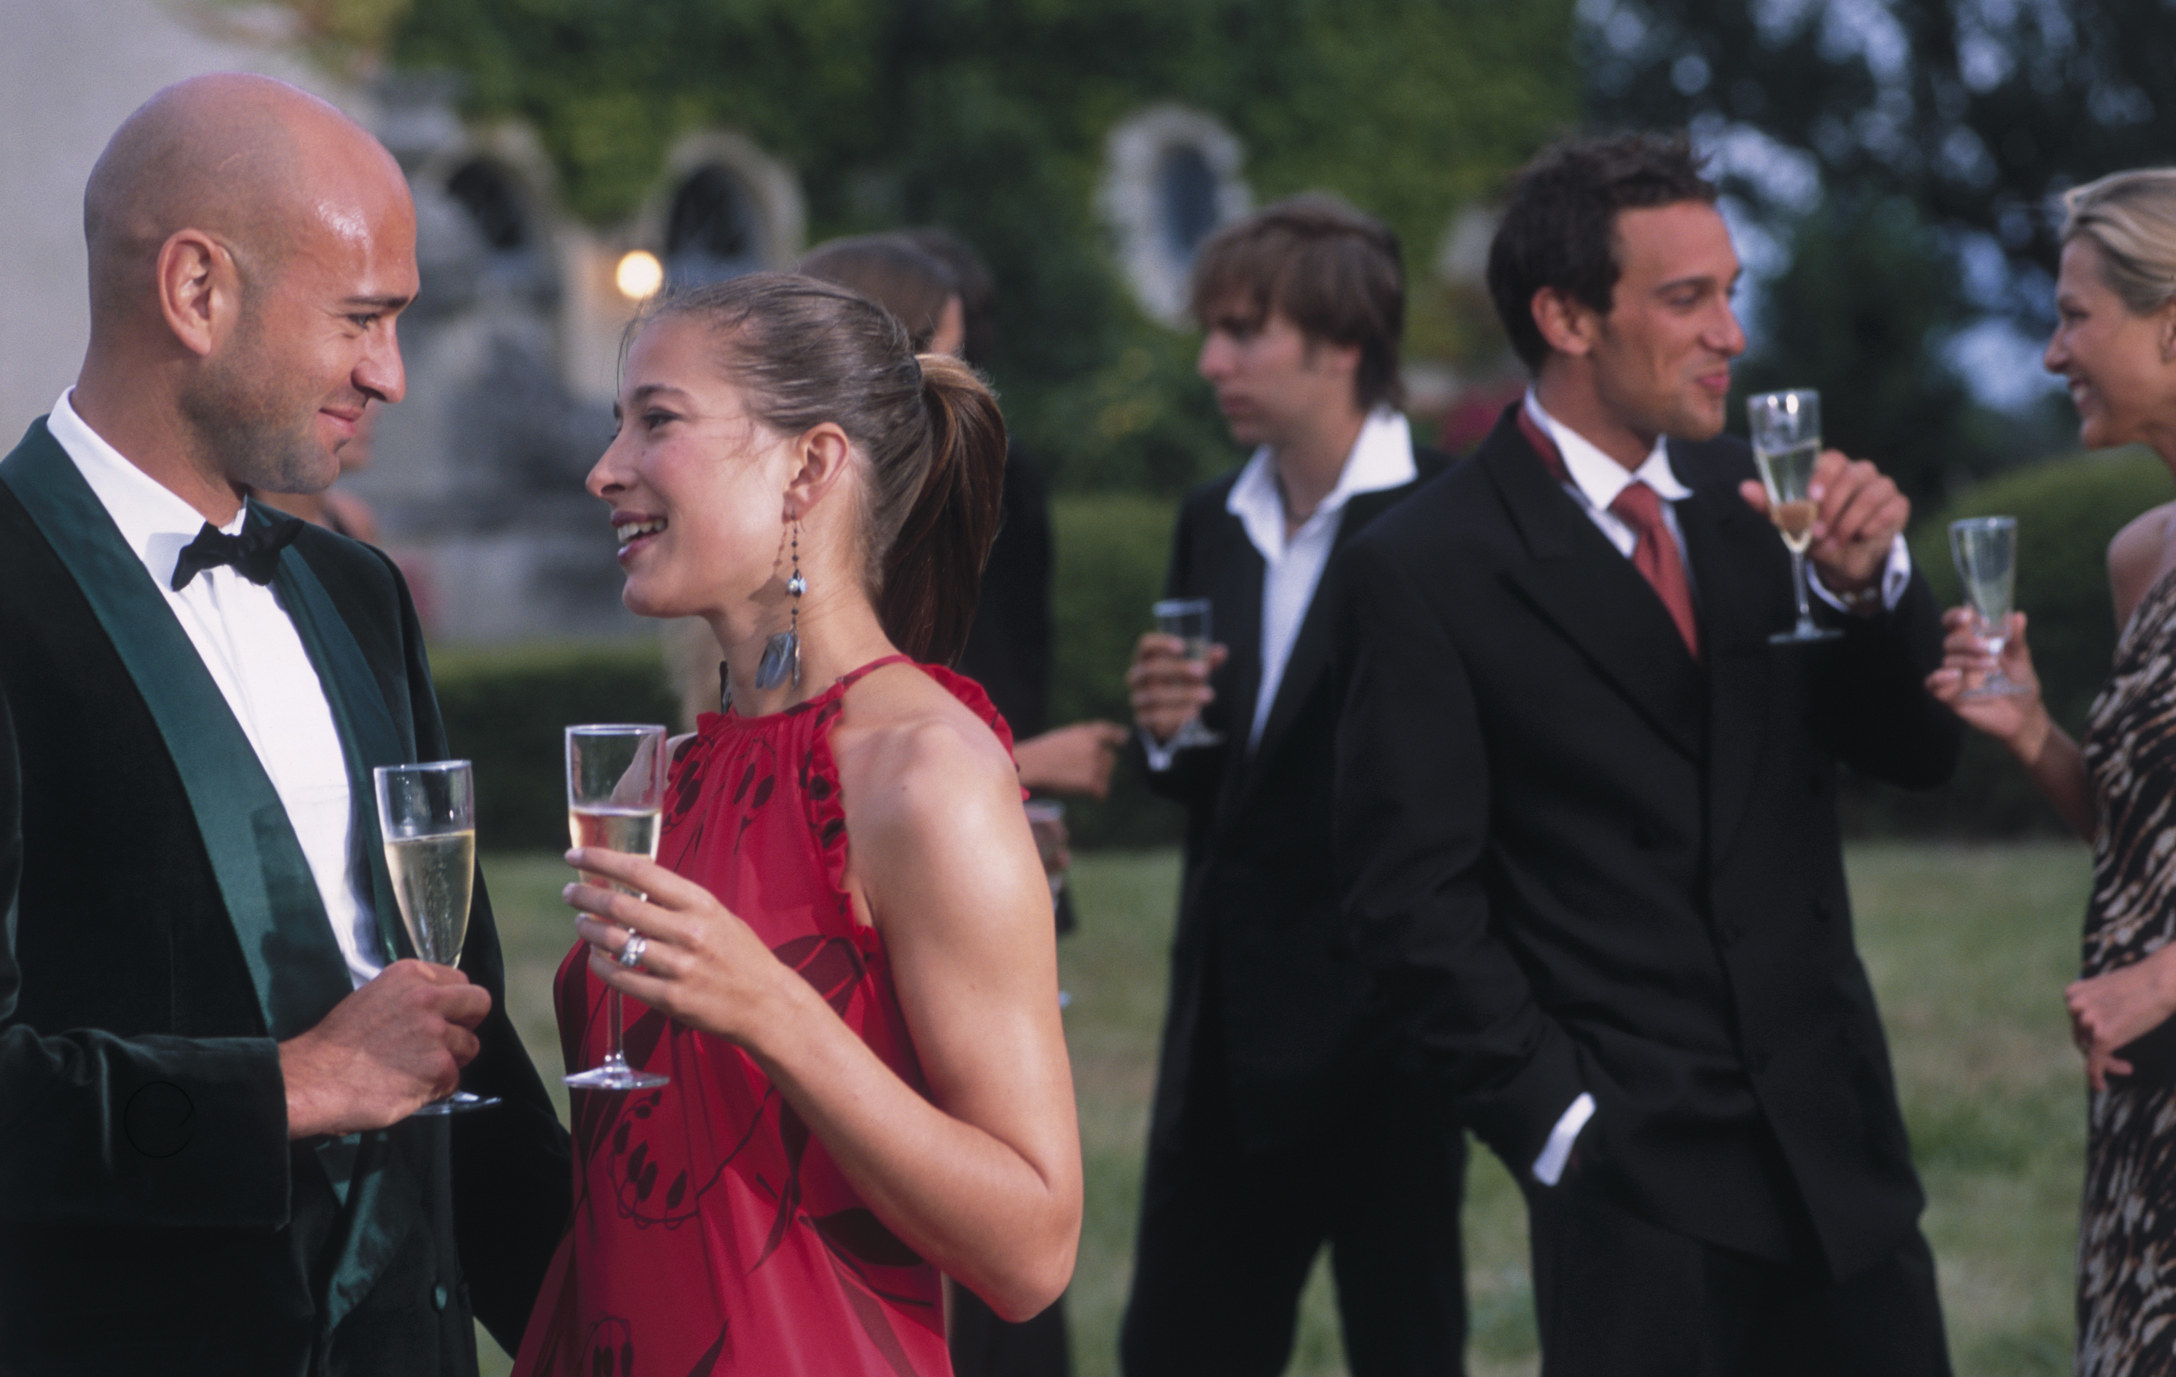 People drinking champagne at a fancy event